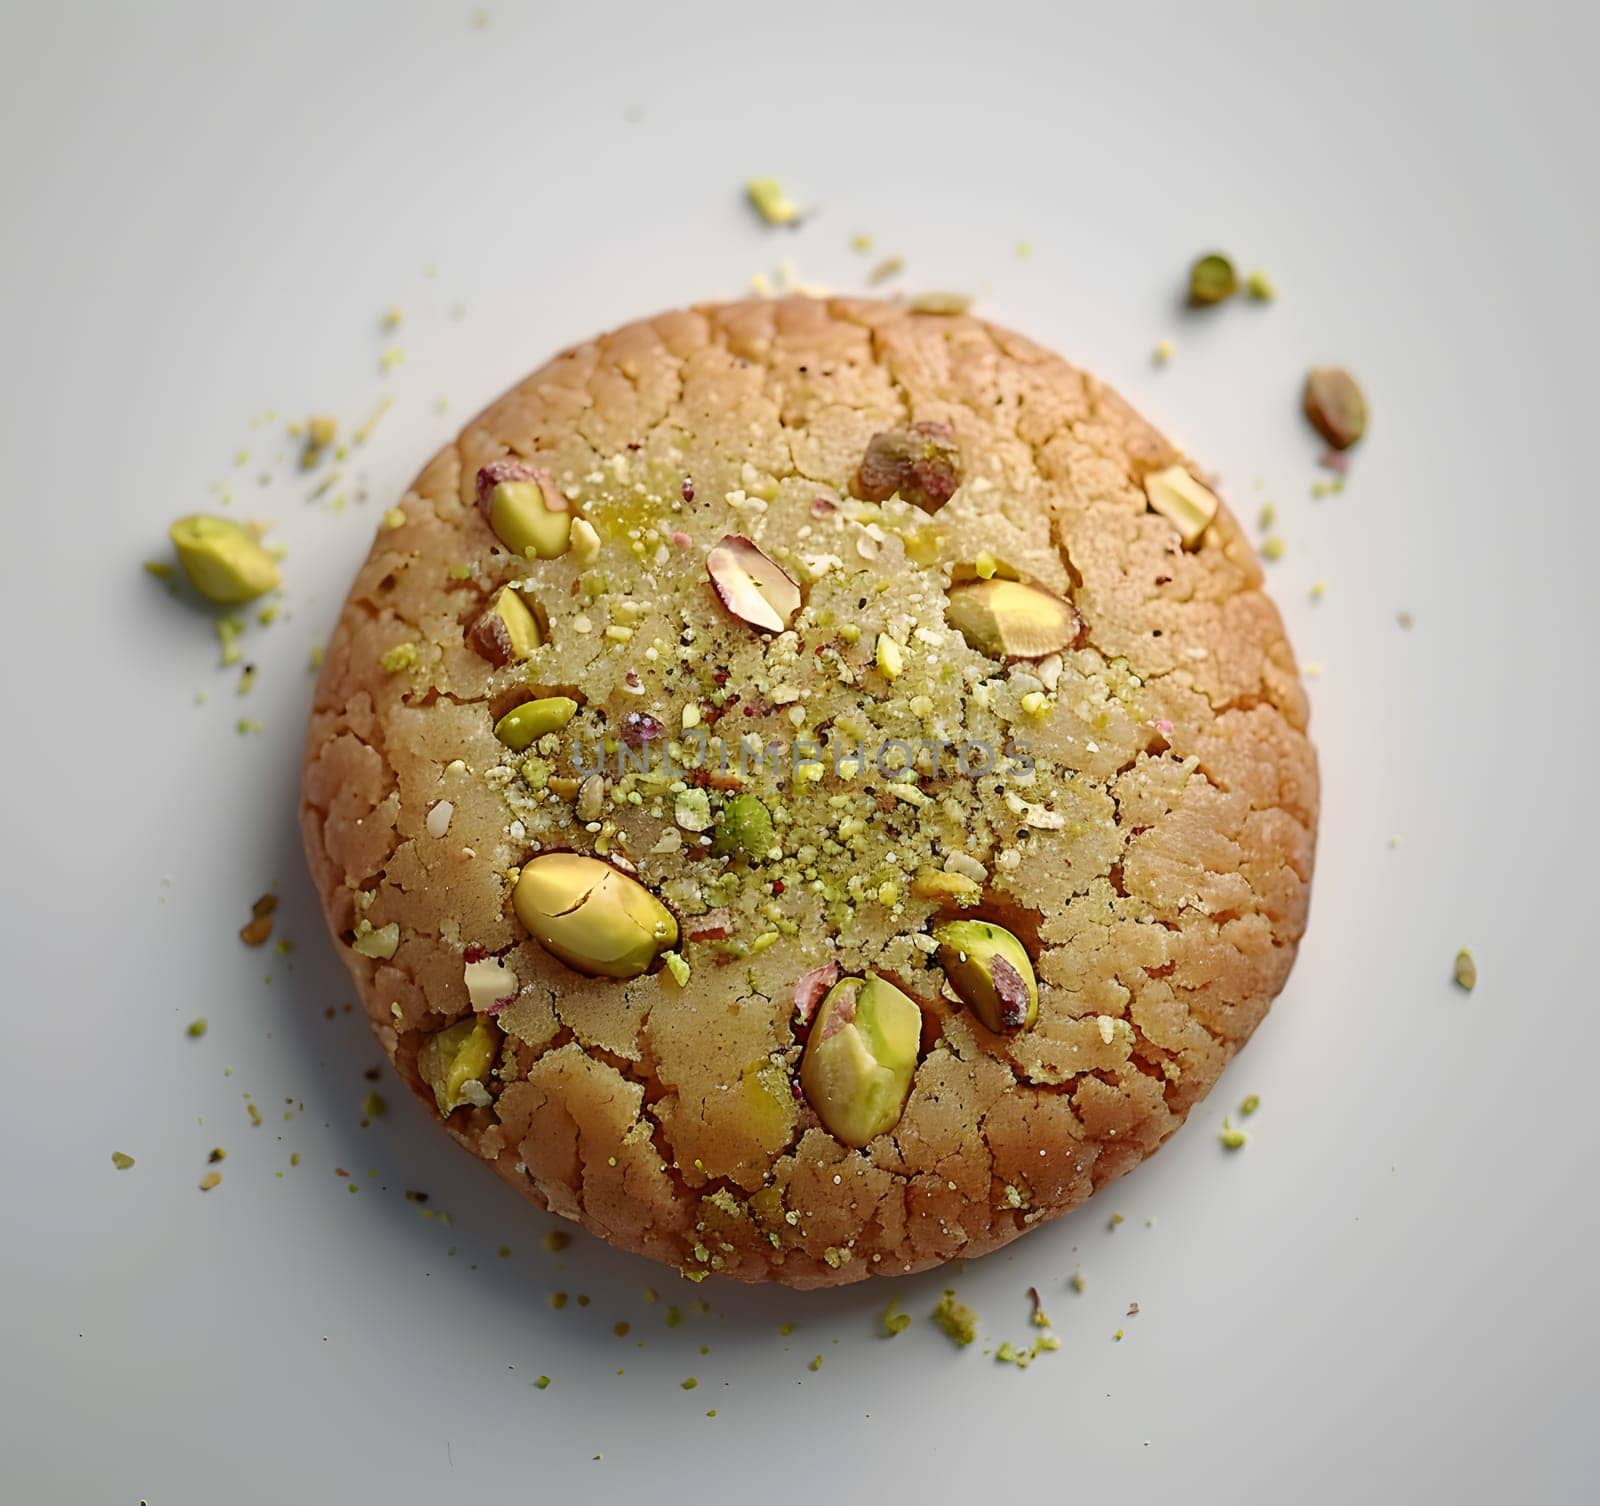 A delicious cookie topped with crunchy pistachios, placed on a white surface. This baked good is a staple food in many cuisines and is a popular dessert choice. Glutenfree option available